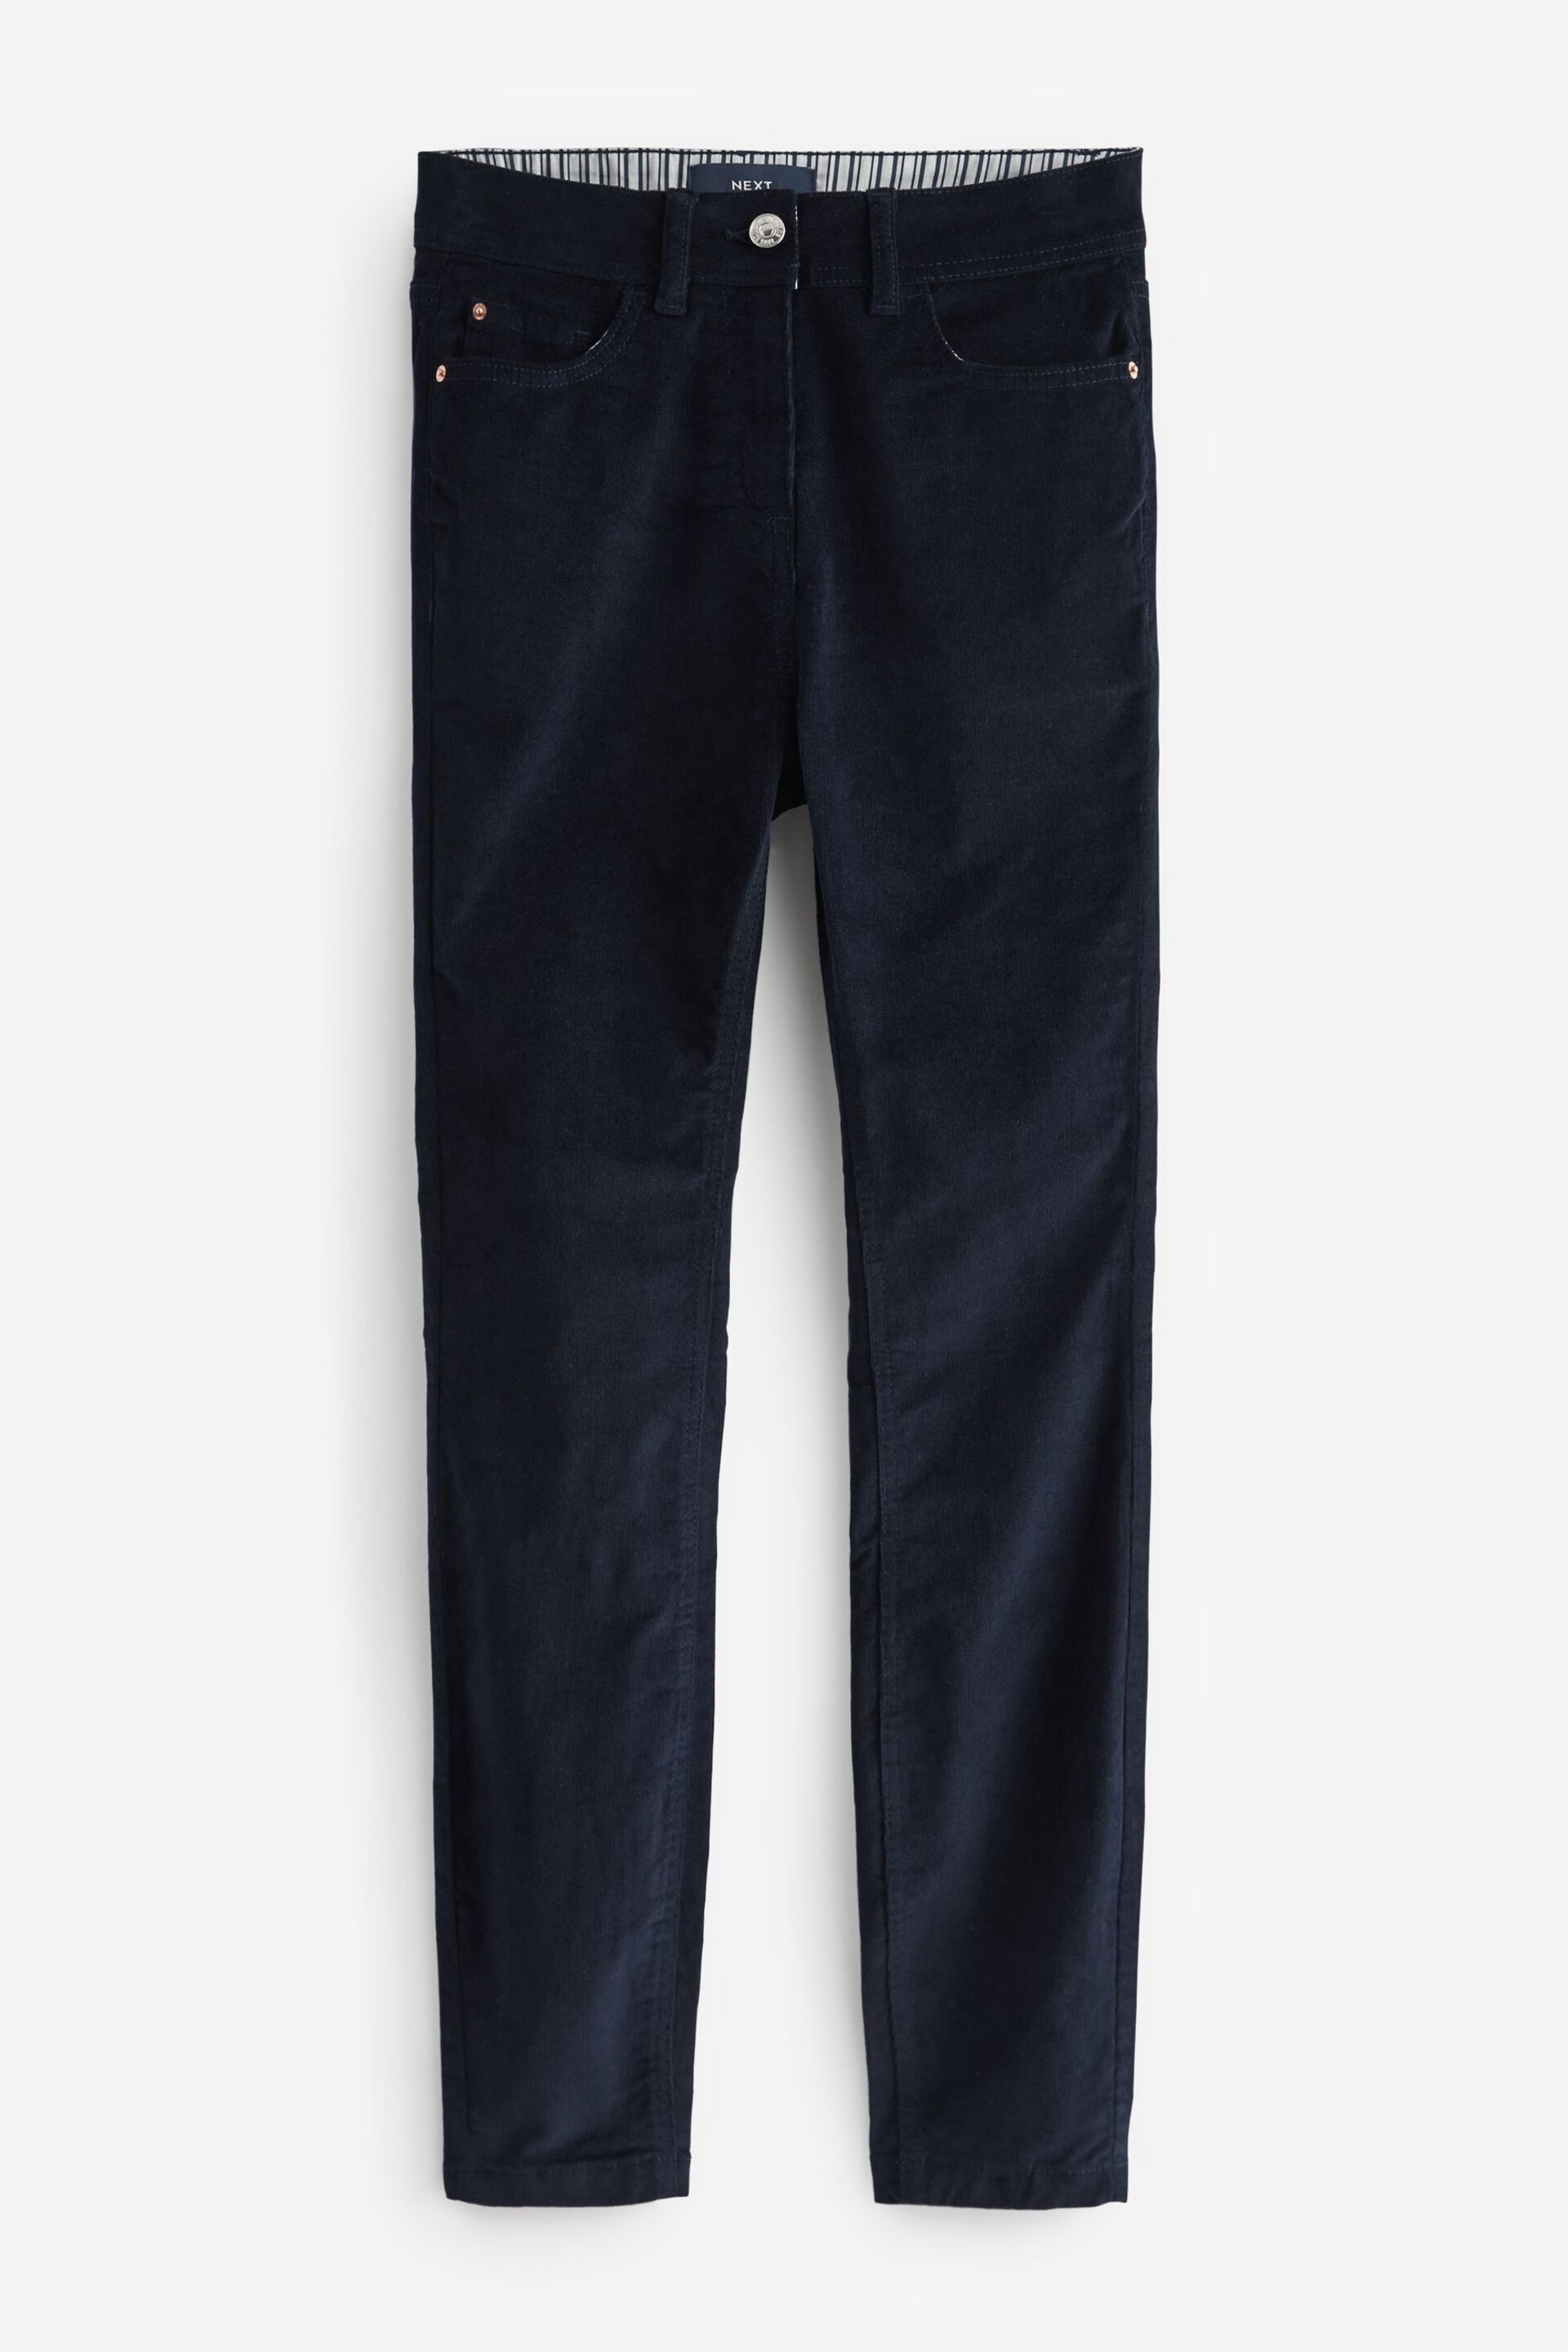 Navy Cord Trousers - Image 5 of 6